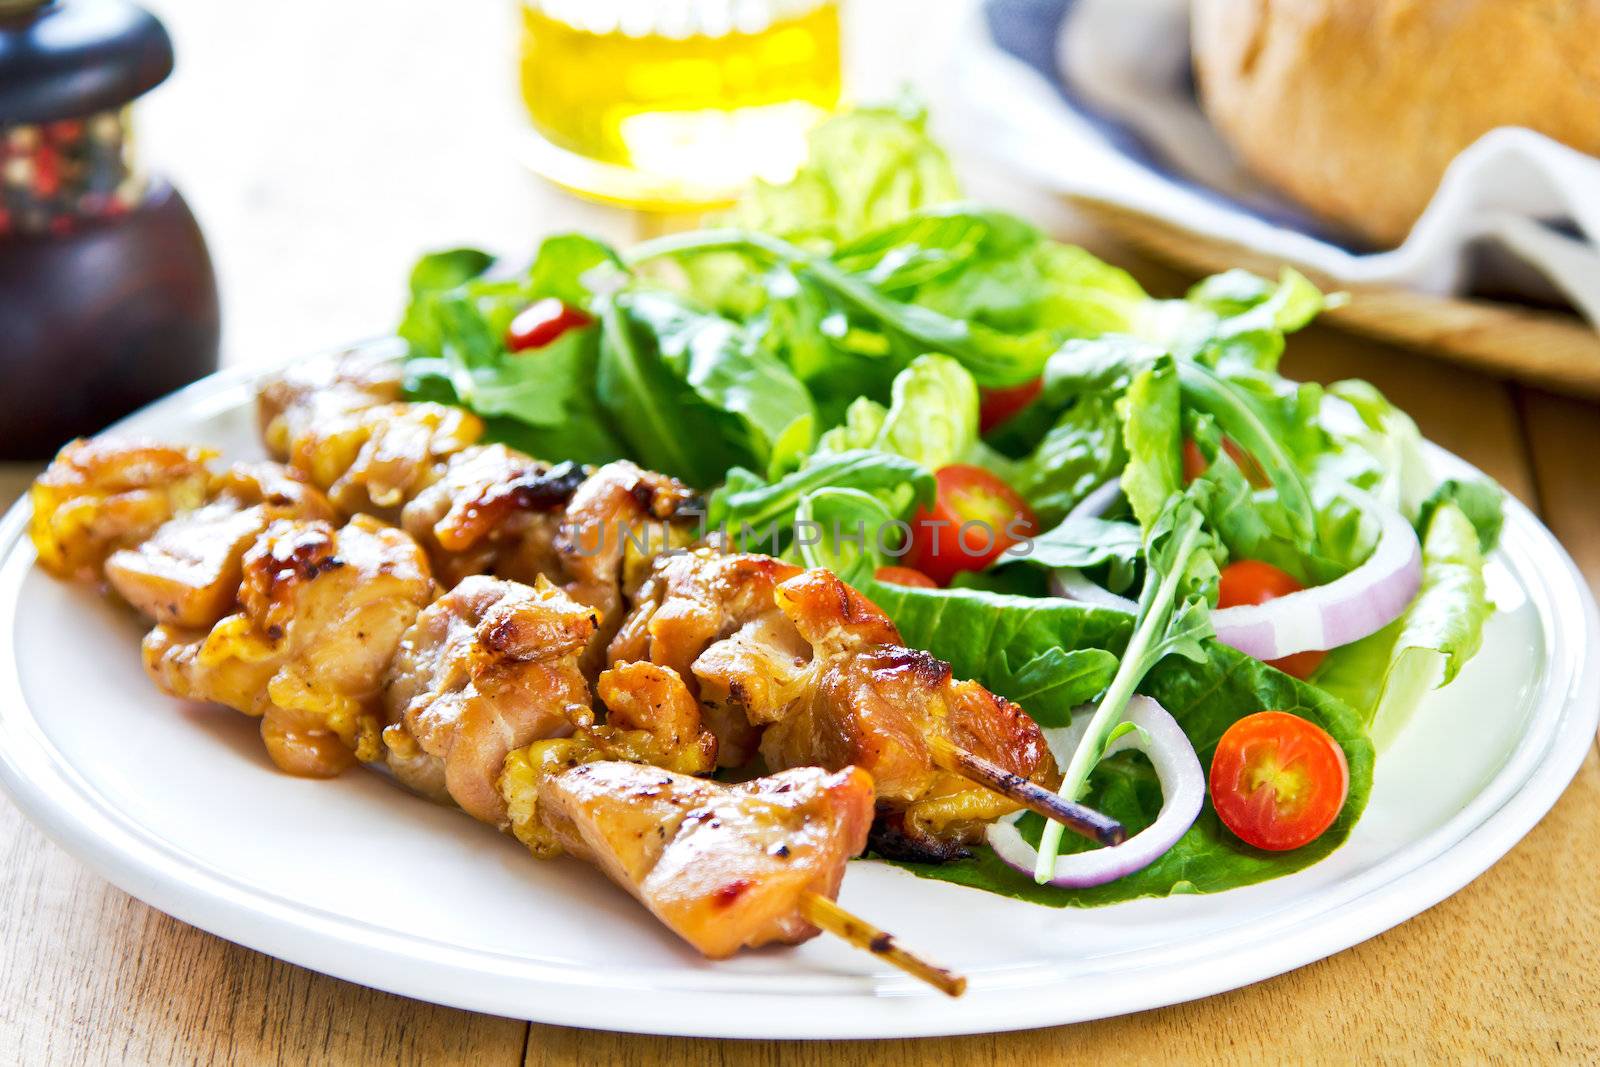 Grilled chicken skewer with rocket salad by bread